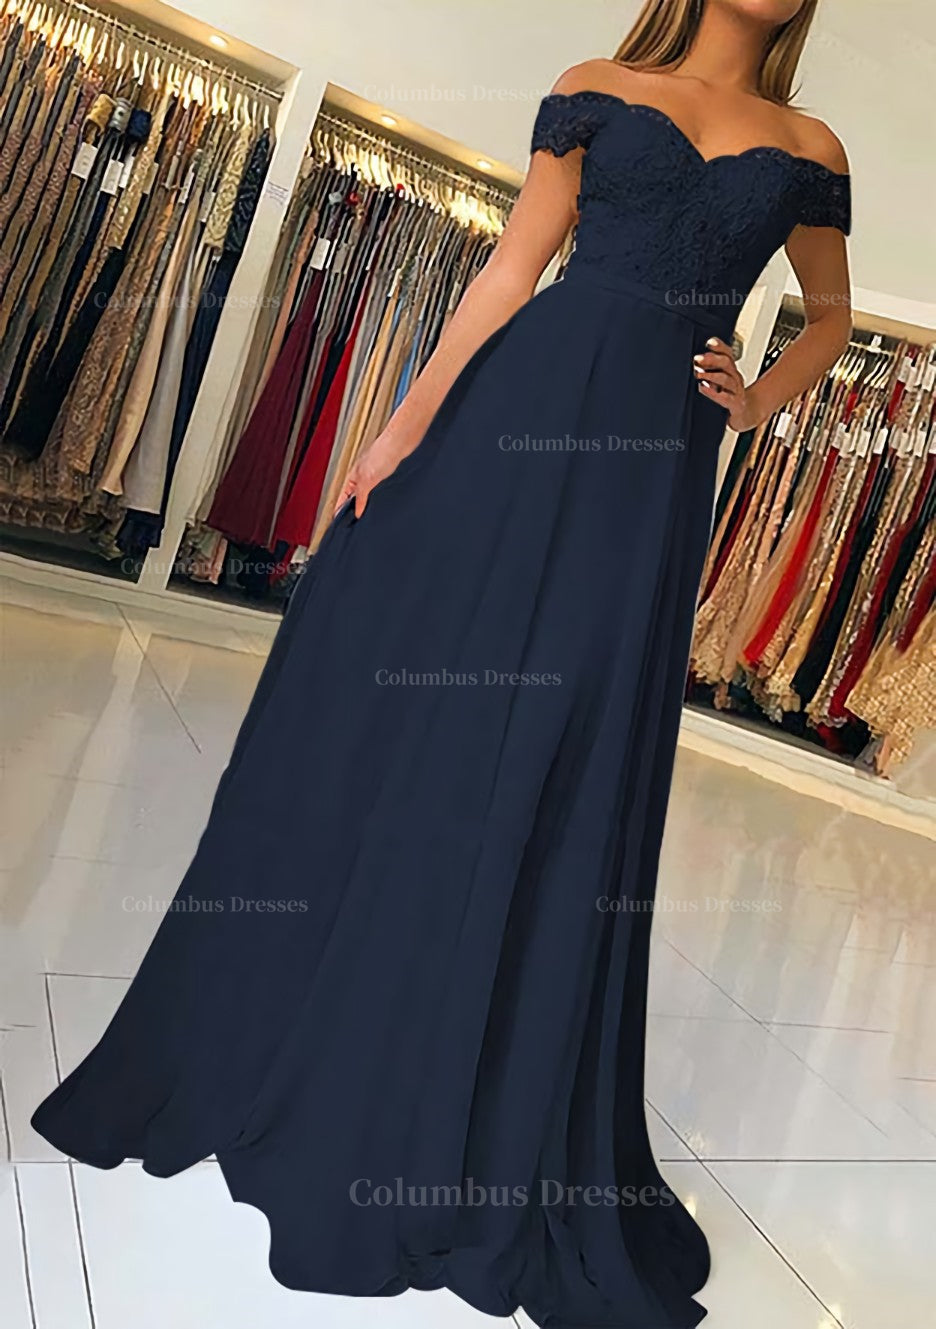 Bridesmaid Dress Inspo, A-line/Princess Off-the-Shoulder Short Sleeve Sweep Train Chiffon Prom Dress With Beading Appliqued